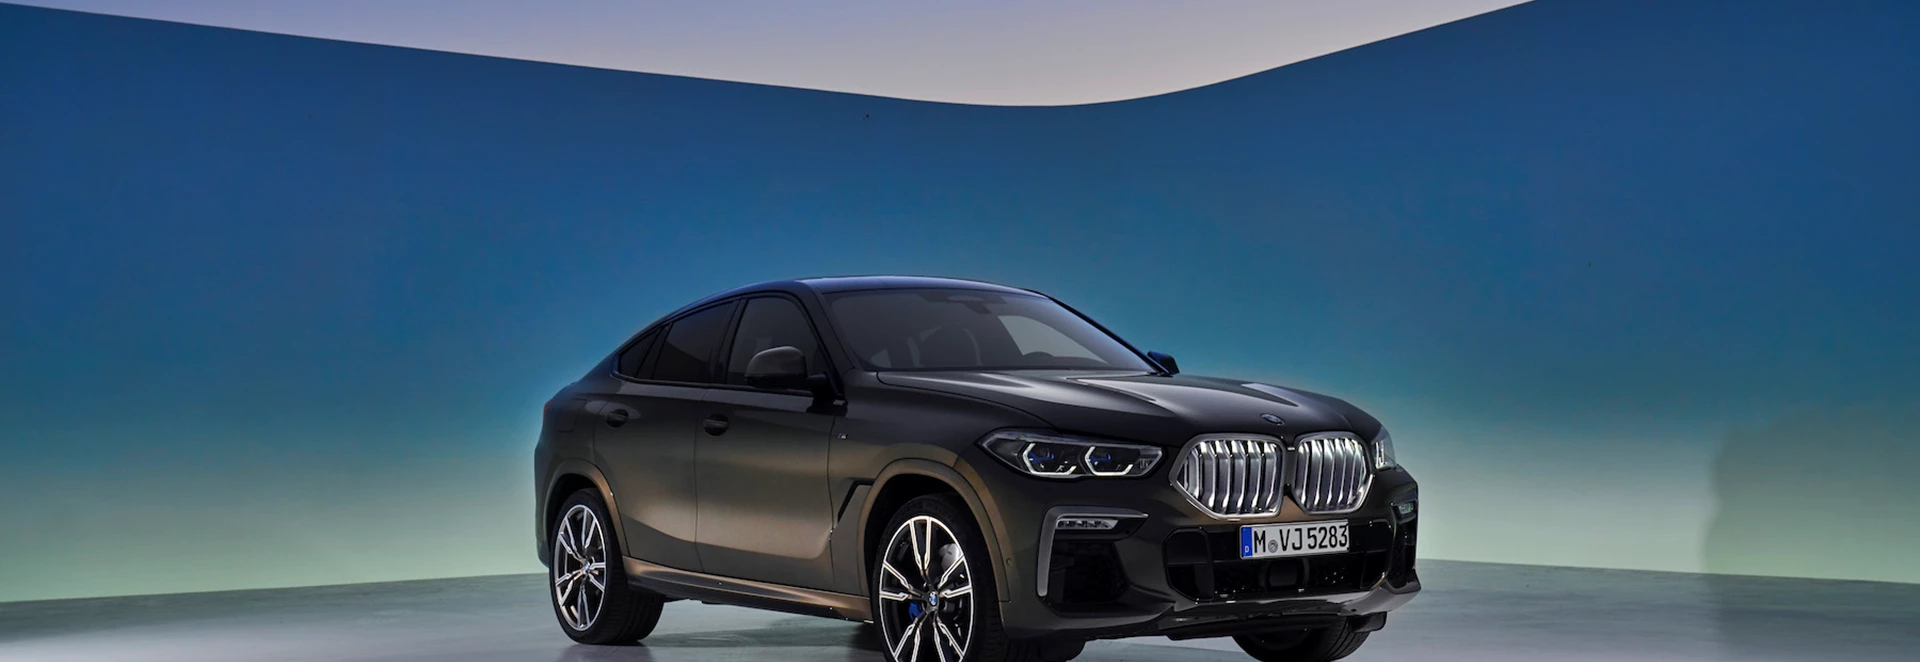 5 reasons why the new BMW X6 is 2020’s boldest SUV 